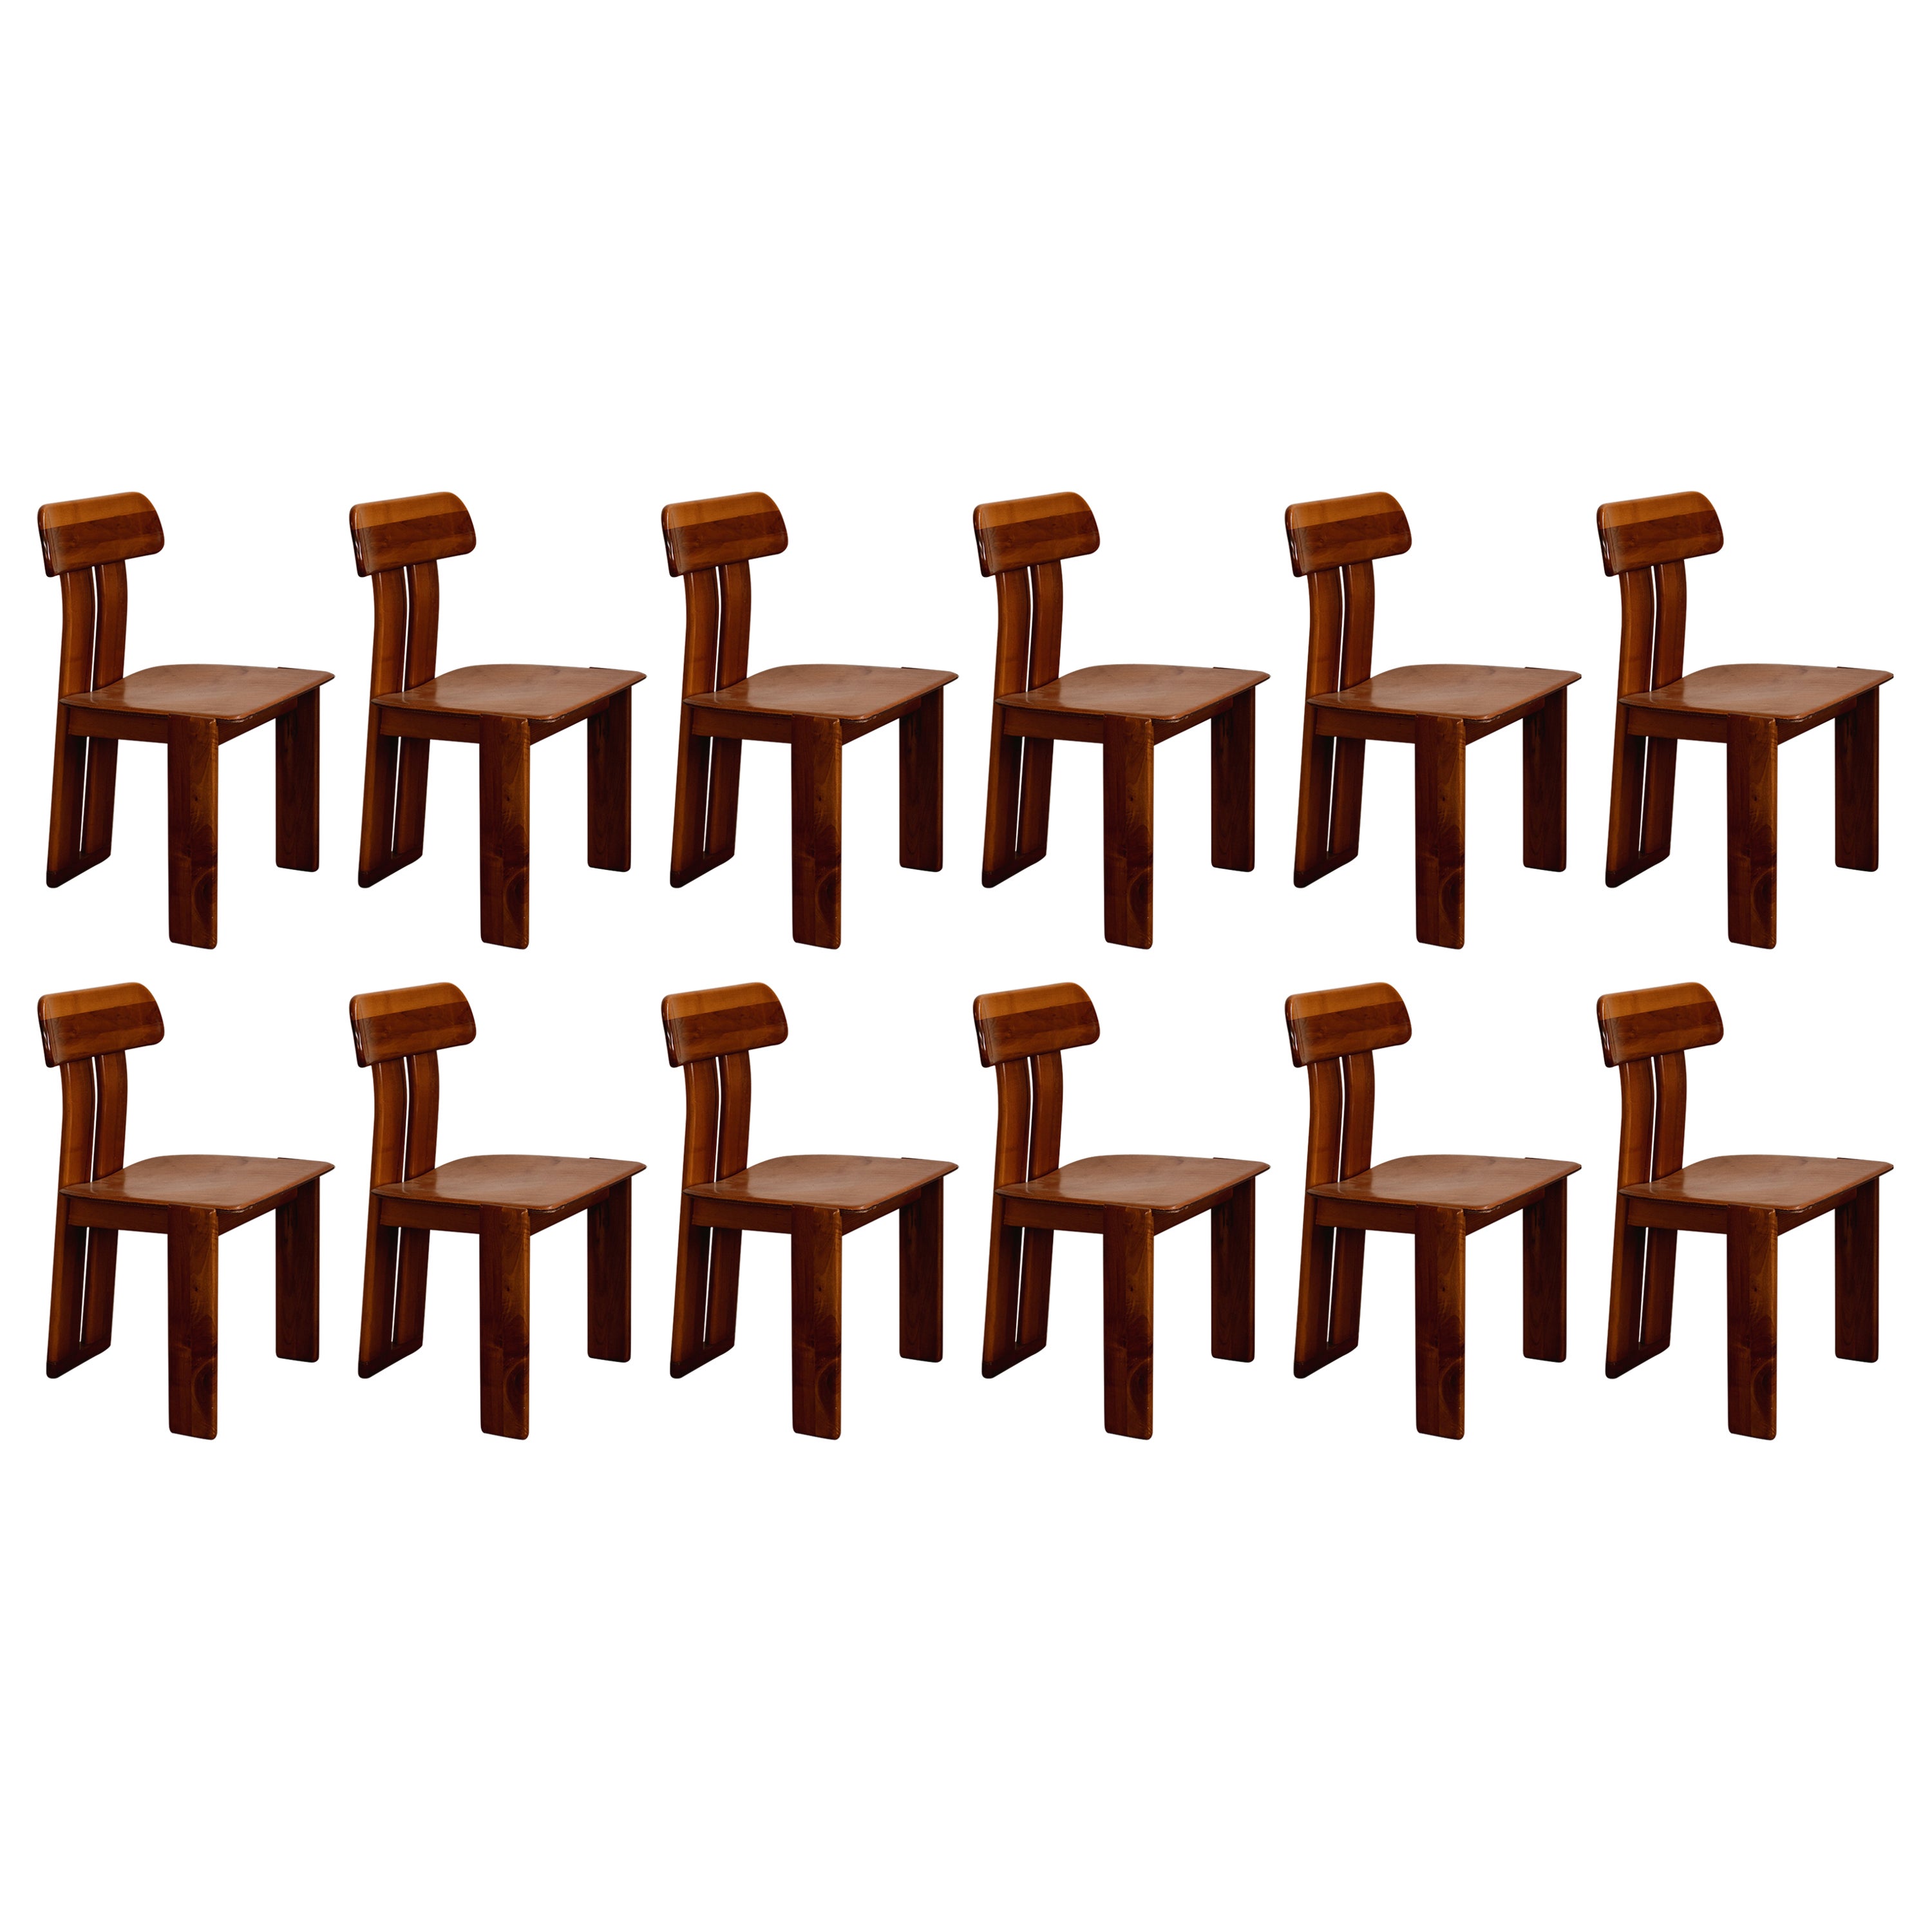 Mario Marenco "Sapporo" Chairs for Mobil Girgi, 1970, Set of 12 For Sale